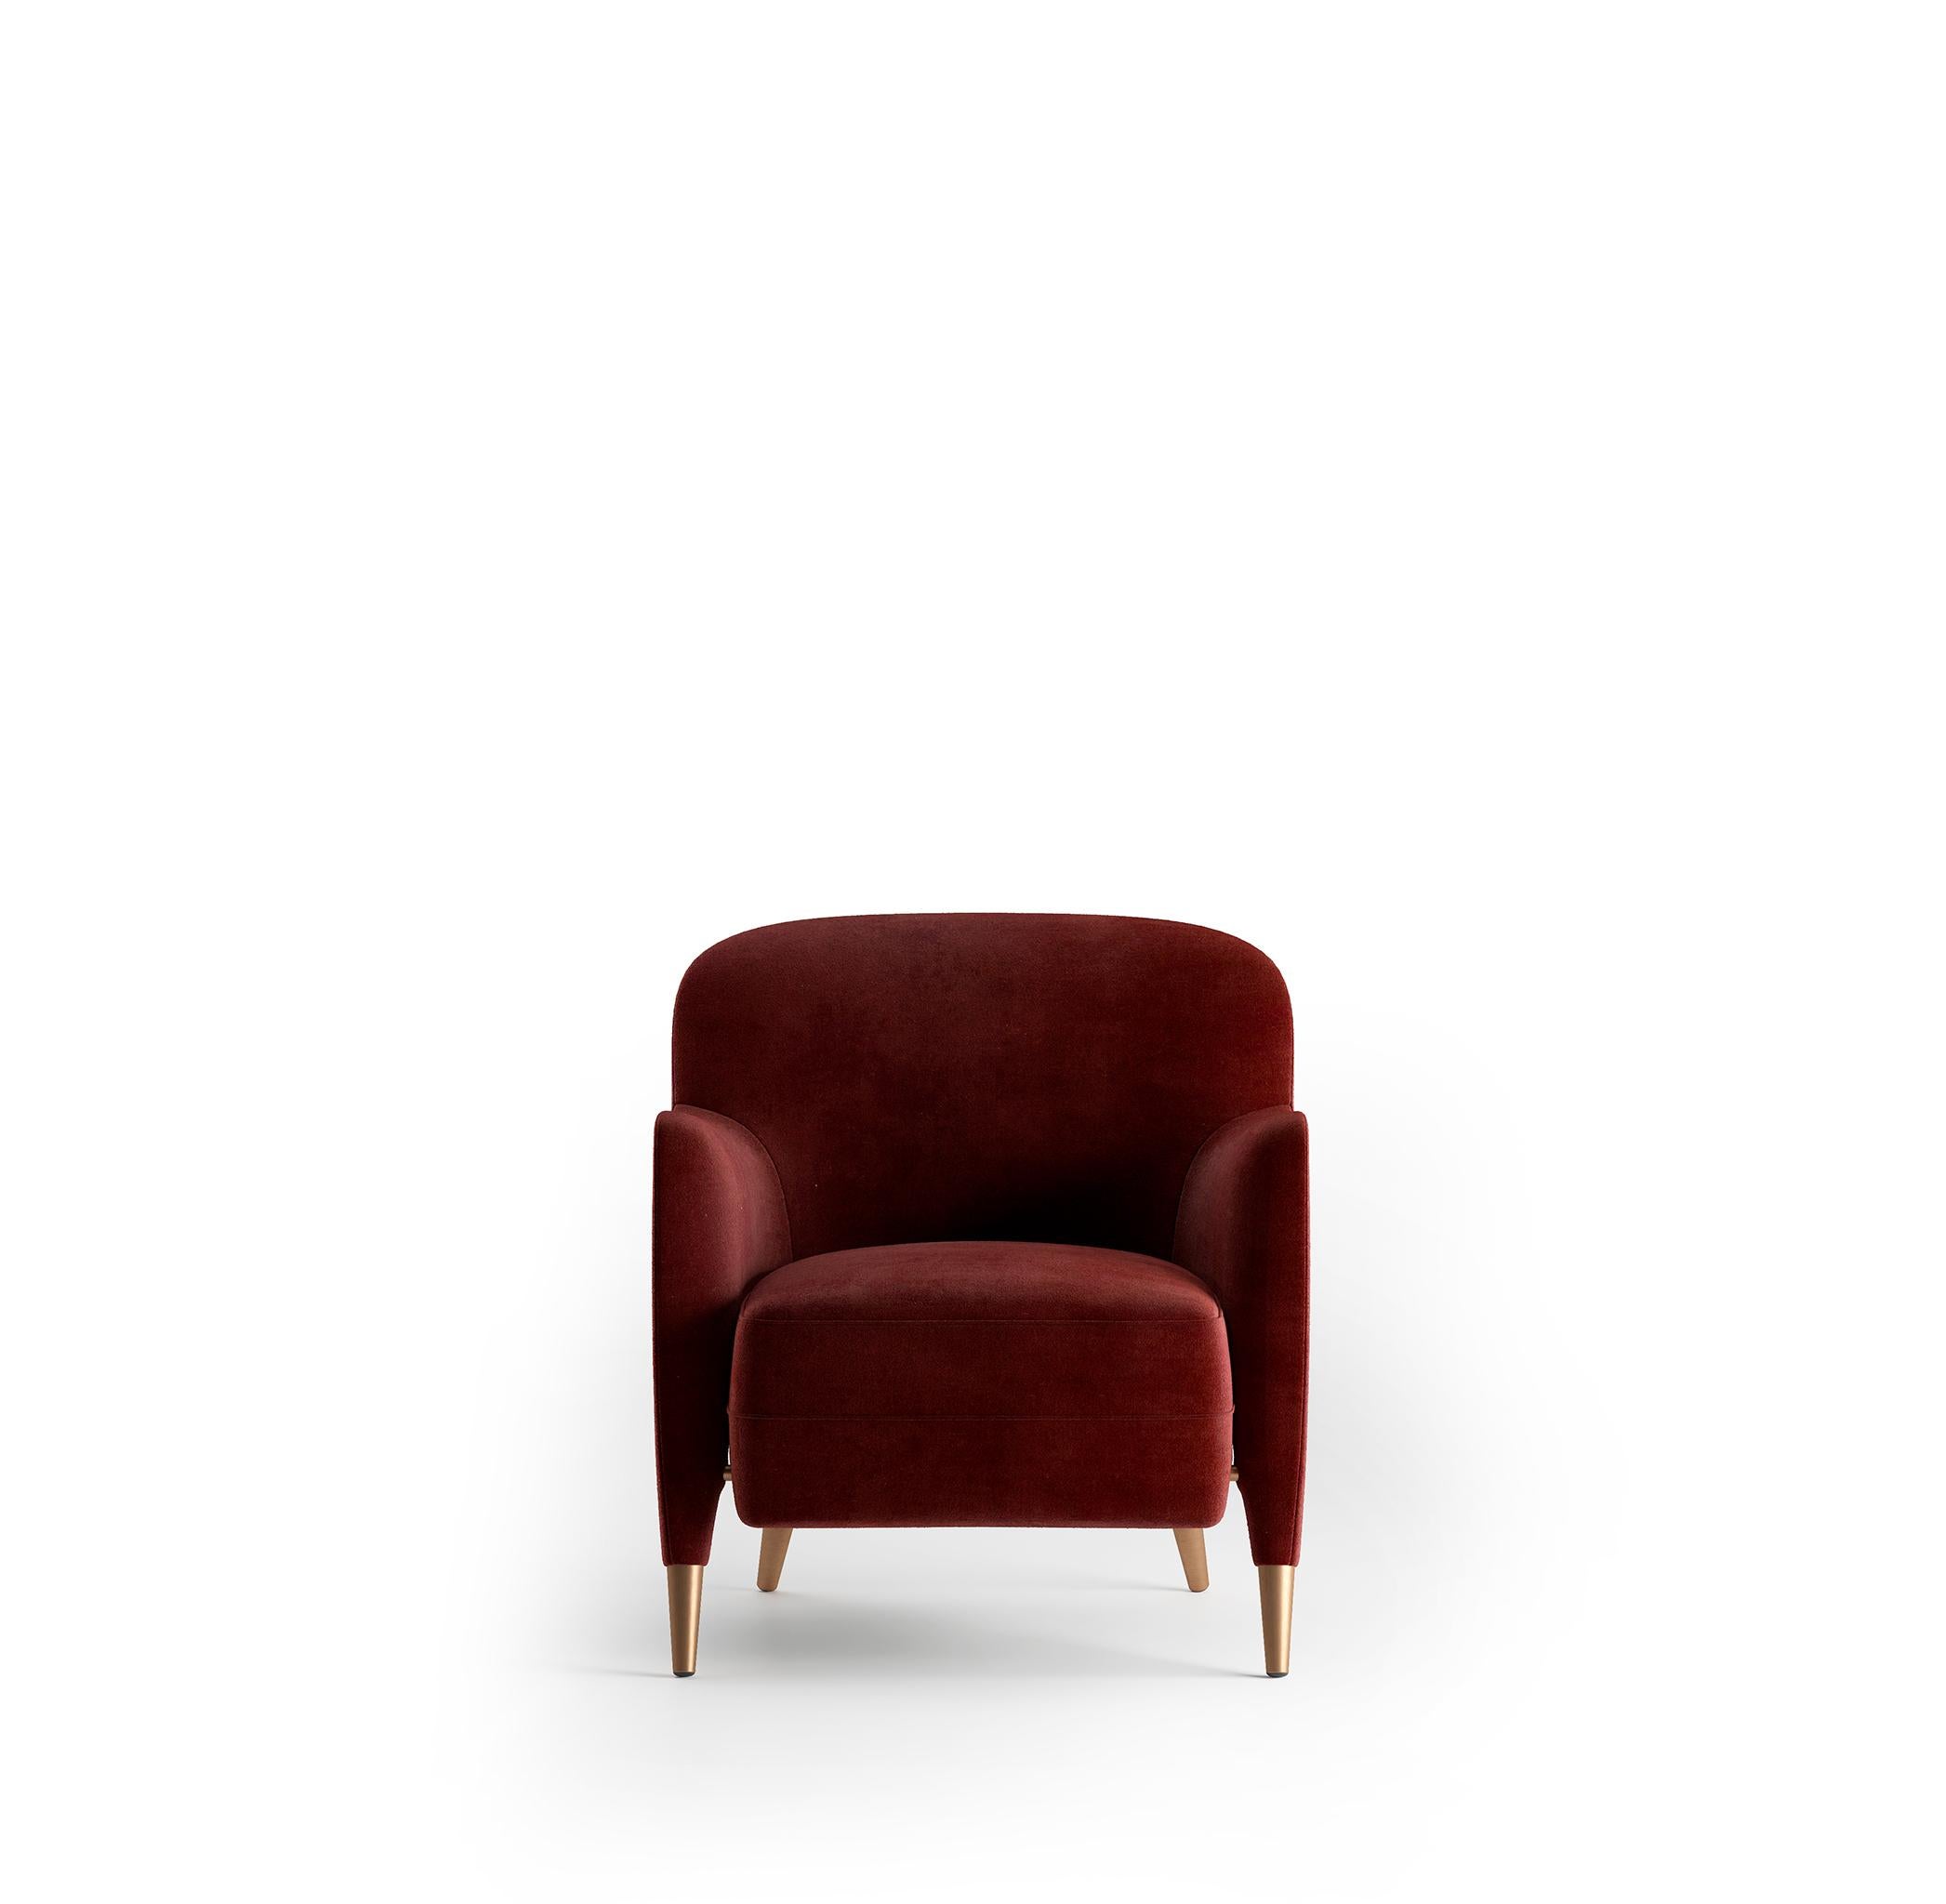 Italian Red Velvet Armchair Molteni&C by Gio Ponti Design D.151.4, Made in Italy For Sale